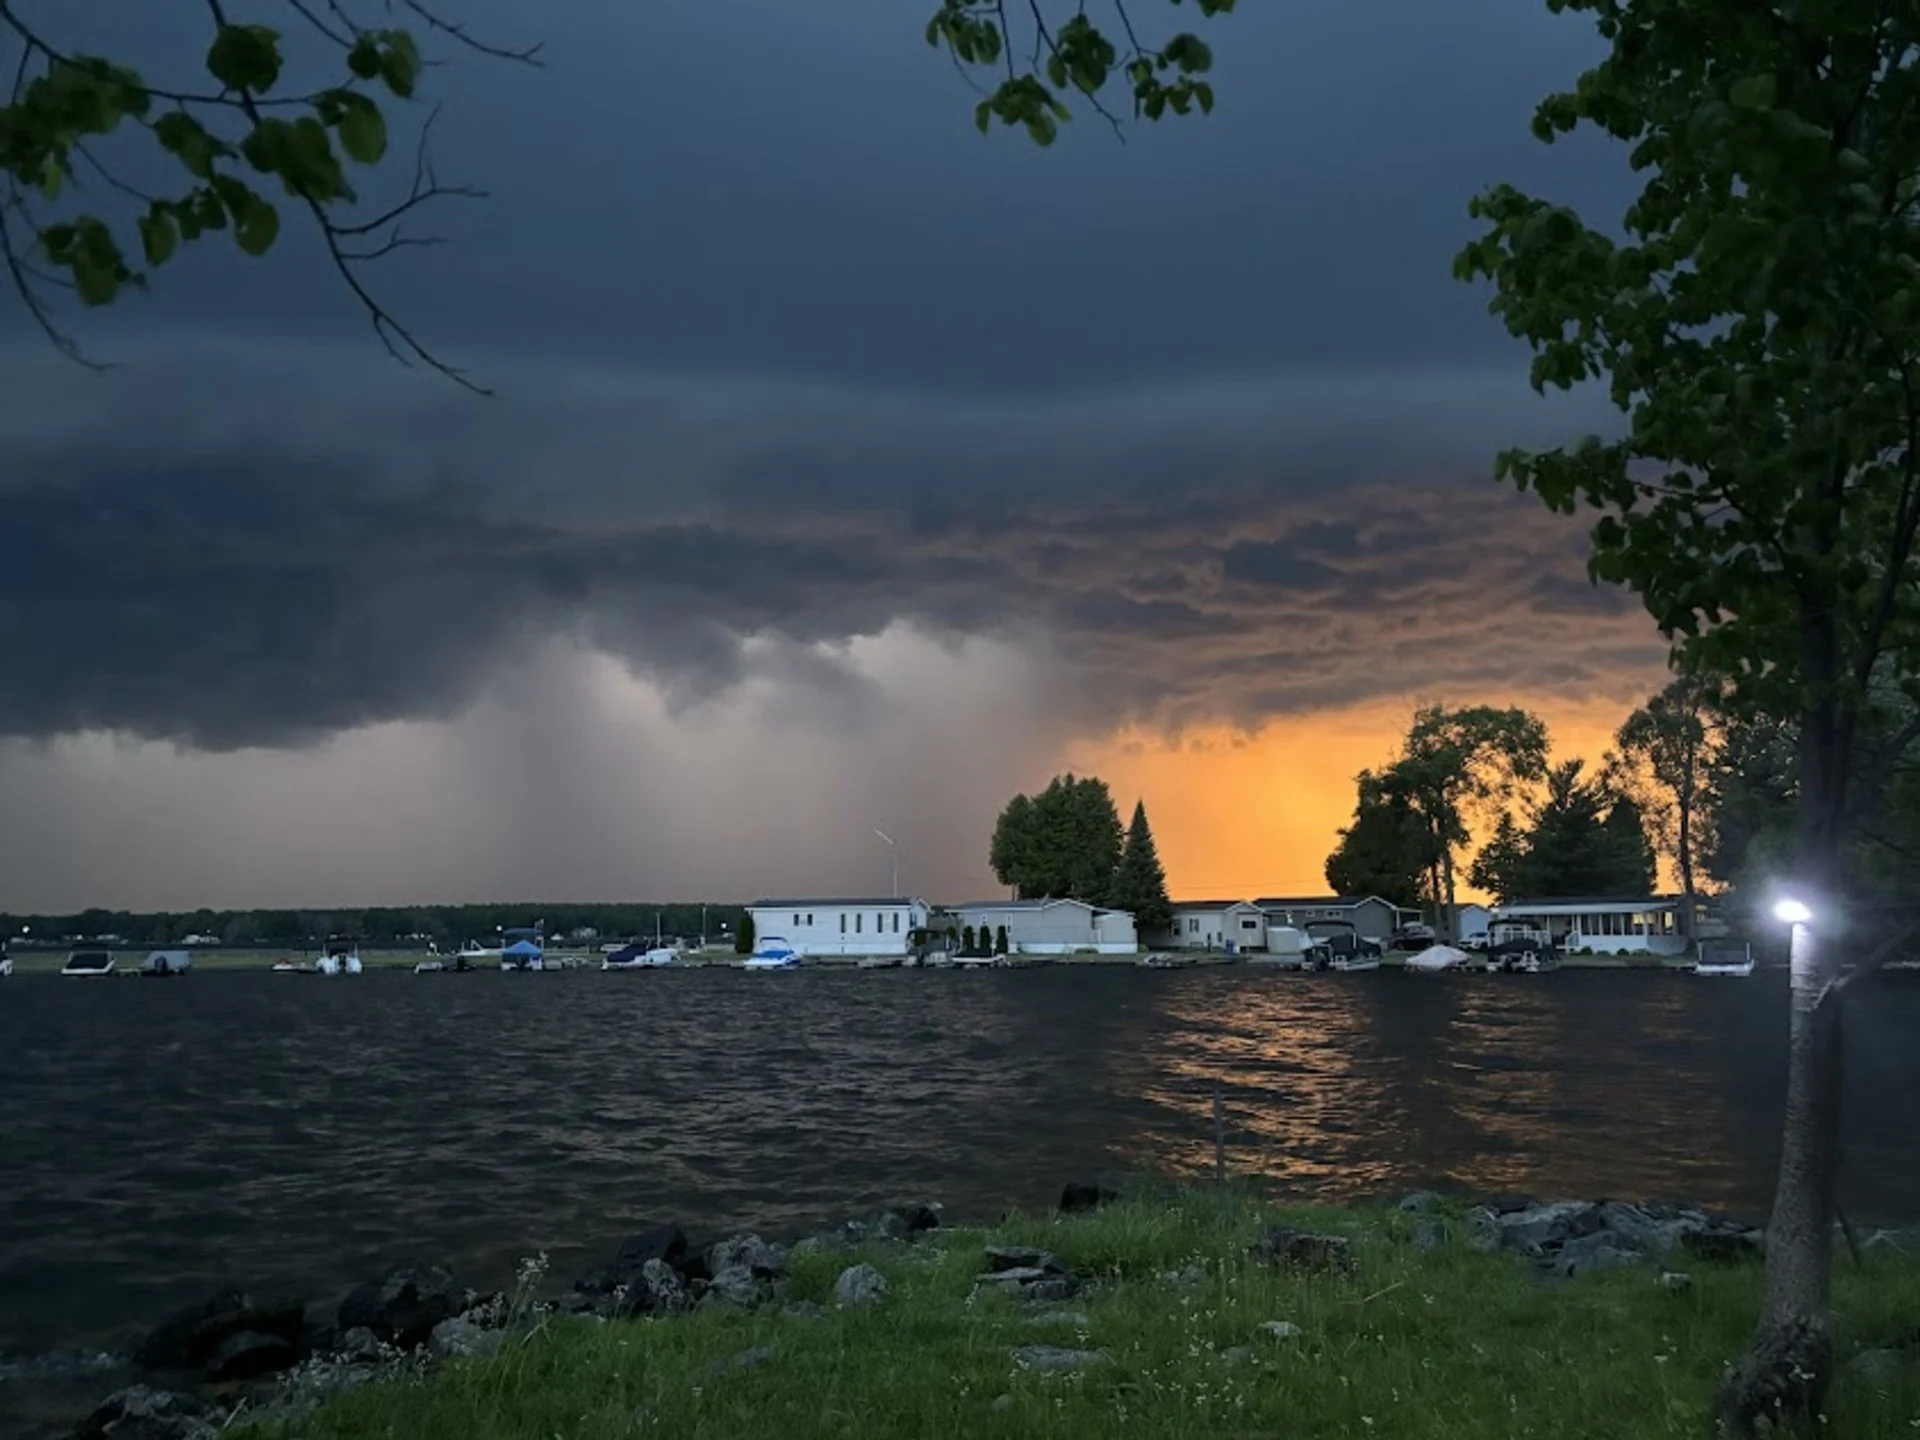 IN PHOTOS: Severe thunderstorms swept across Ontario and Quebec bringing large hail, downed trees, and power outages